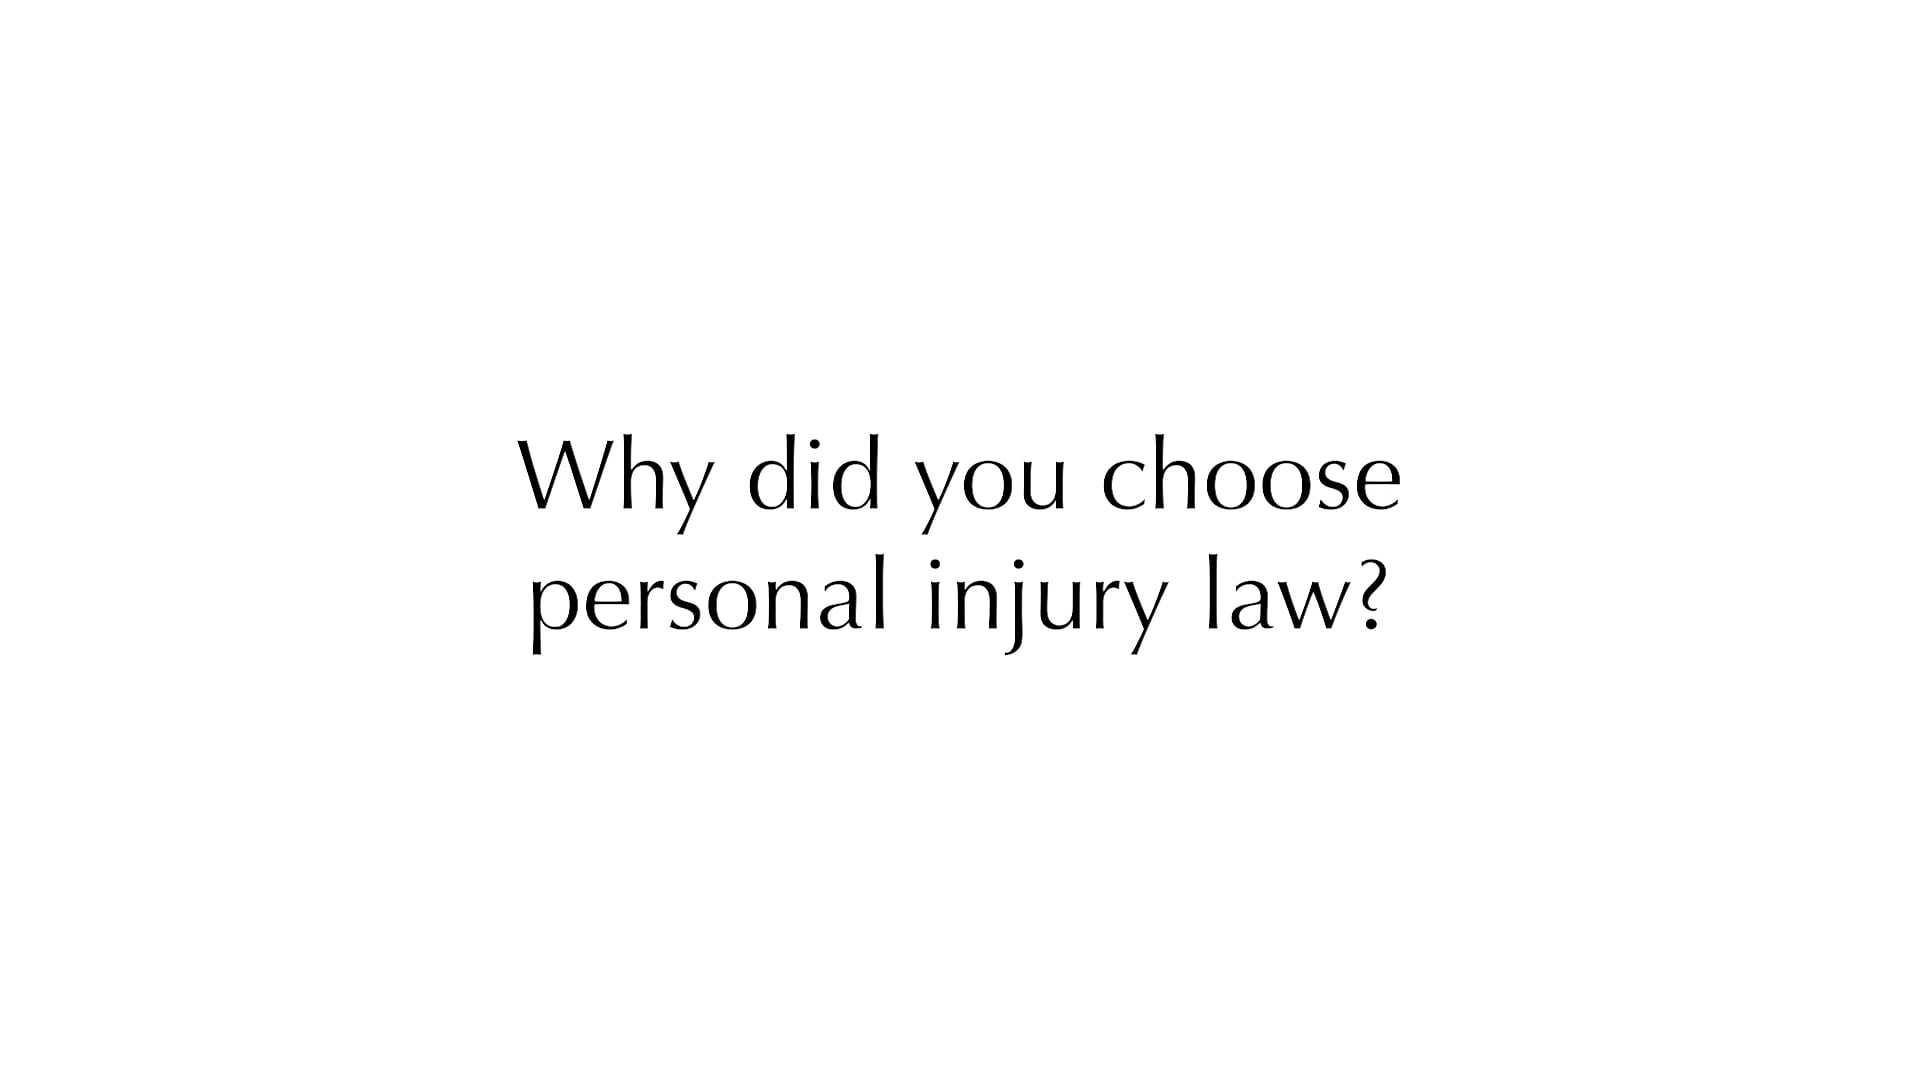 Why did you choose personal injury law